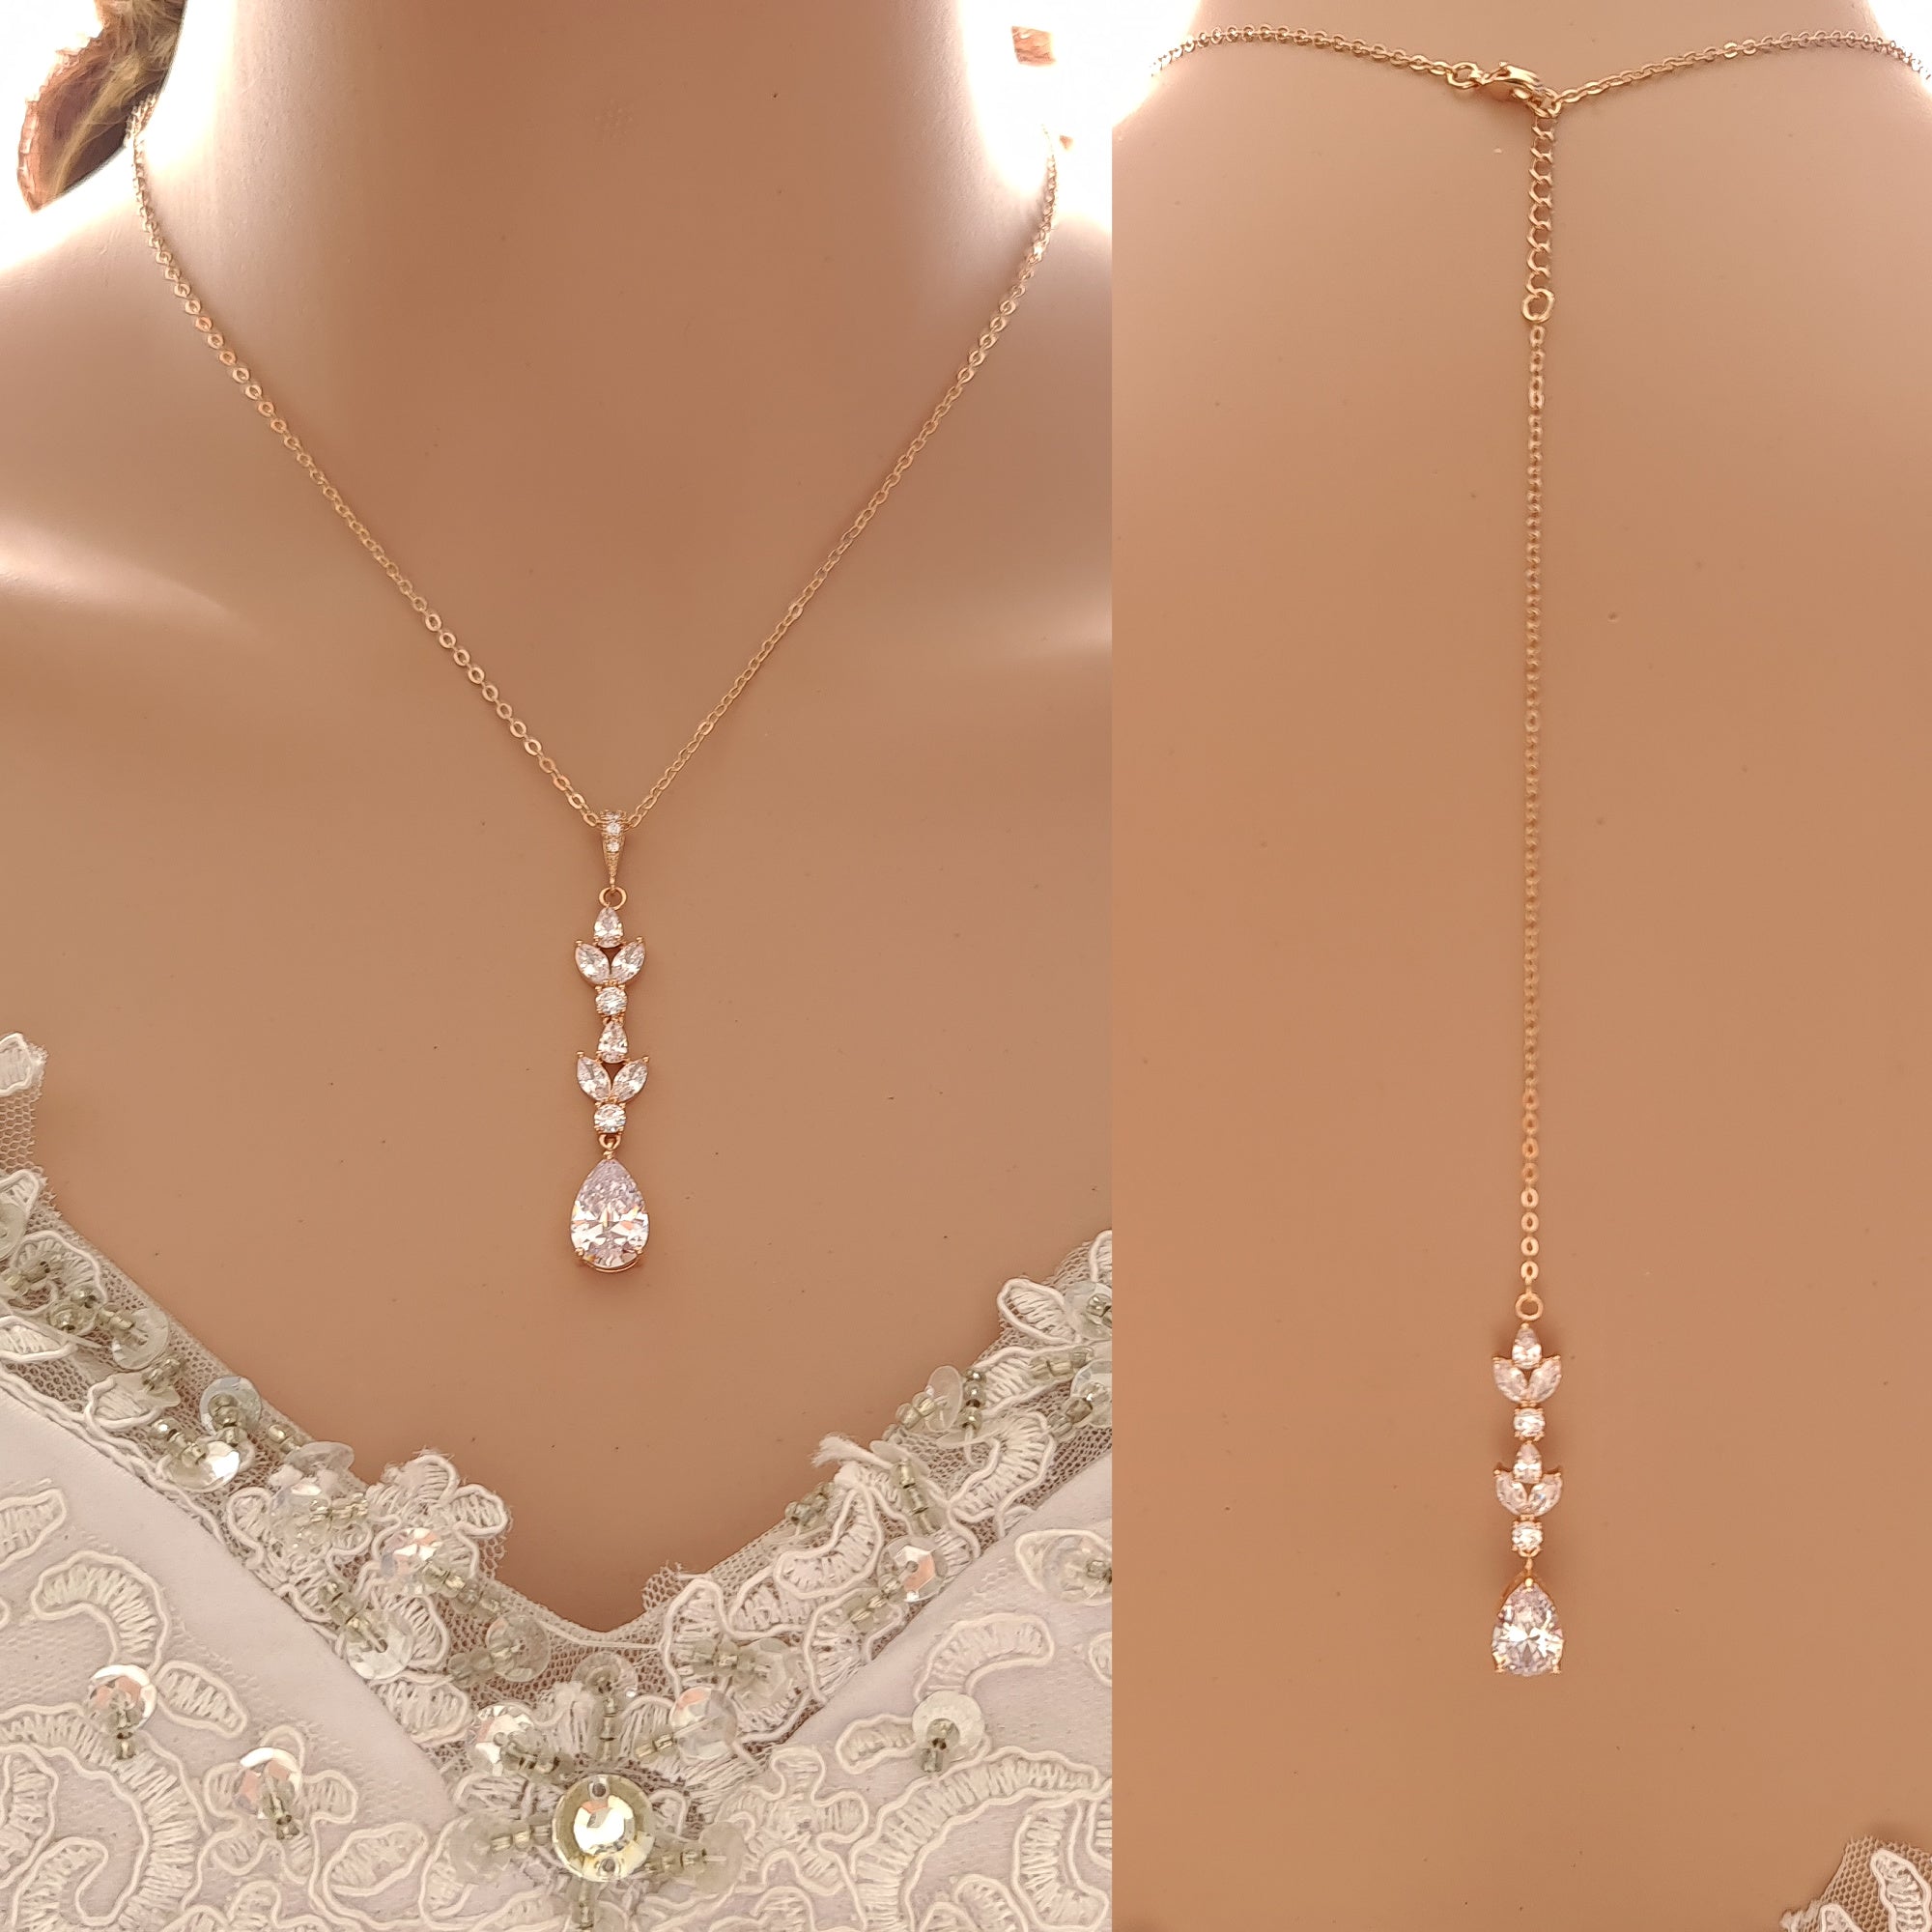 Wedding Jewelry - Cubic Zirconia Bridal Backdrop Necklace and Earrings Set  | ADORA by Simona